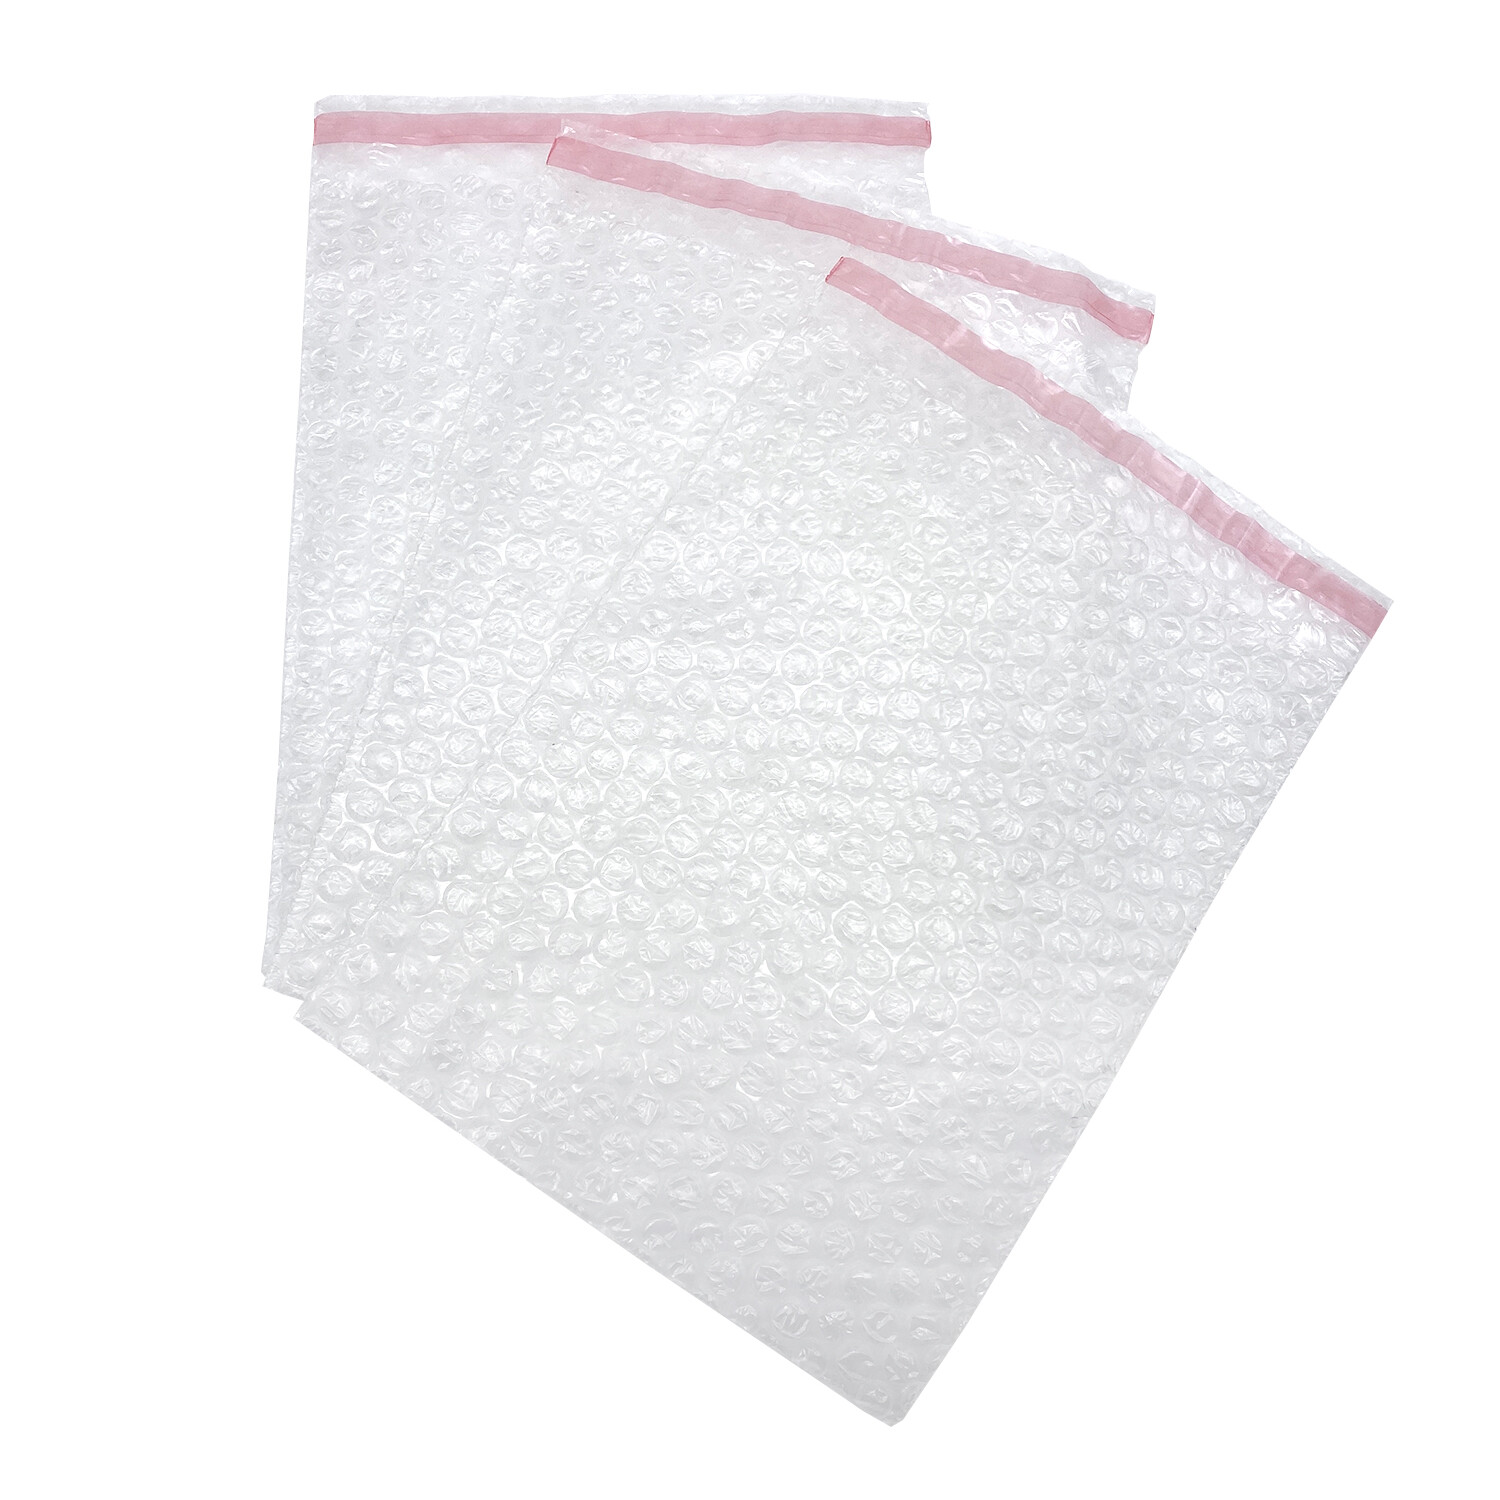 500 x BP1 Bubble Wrap Bags Pouches 100 x 135mm With Self Seal Flap Size